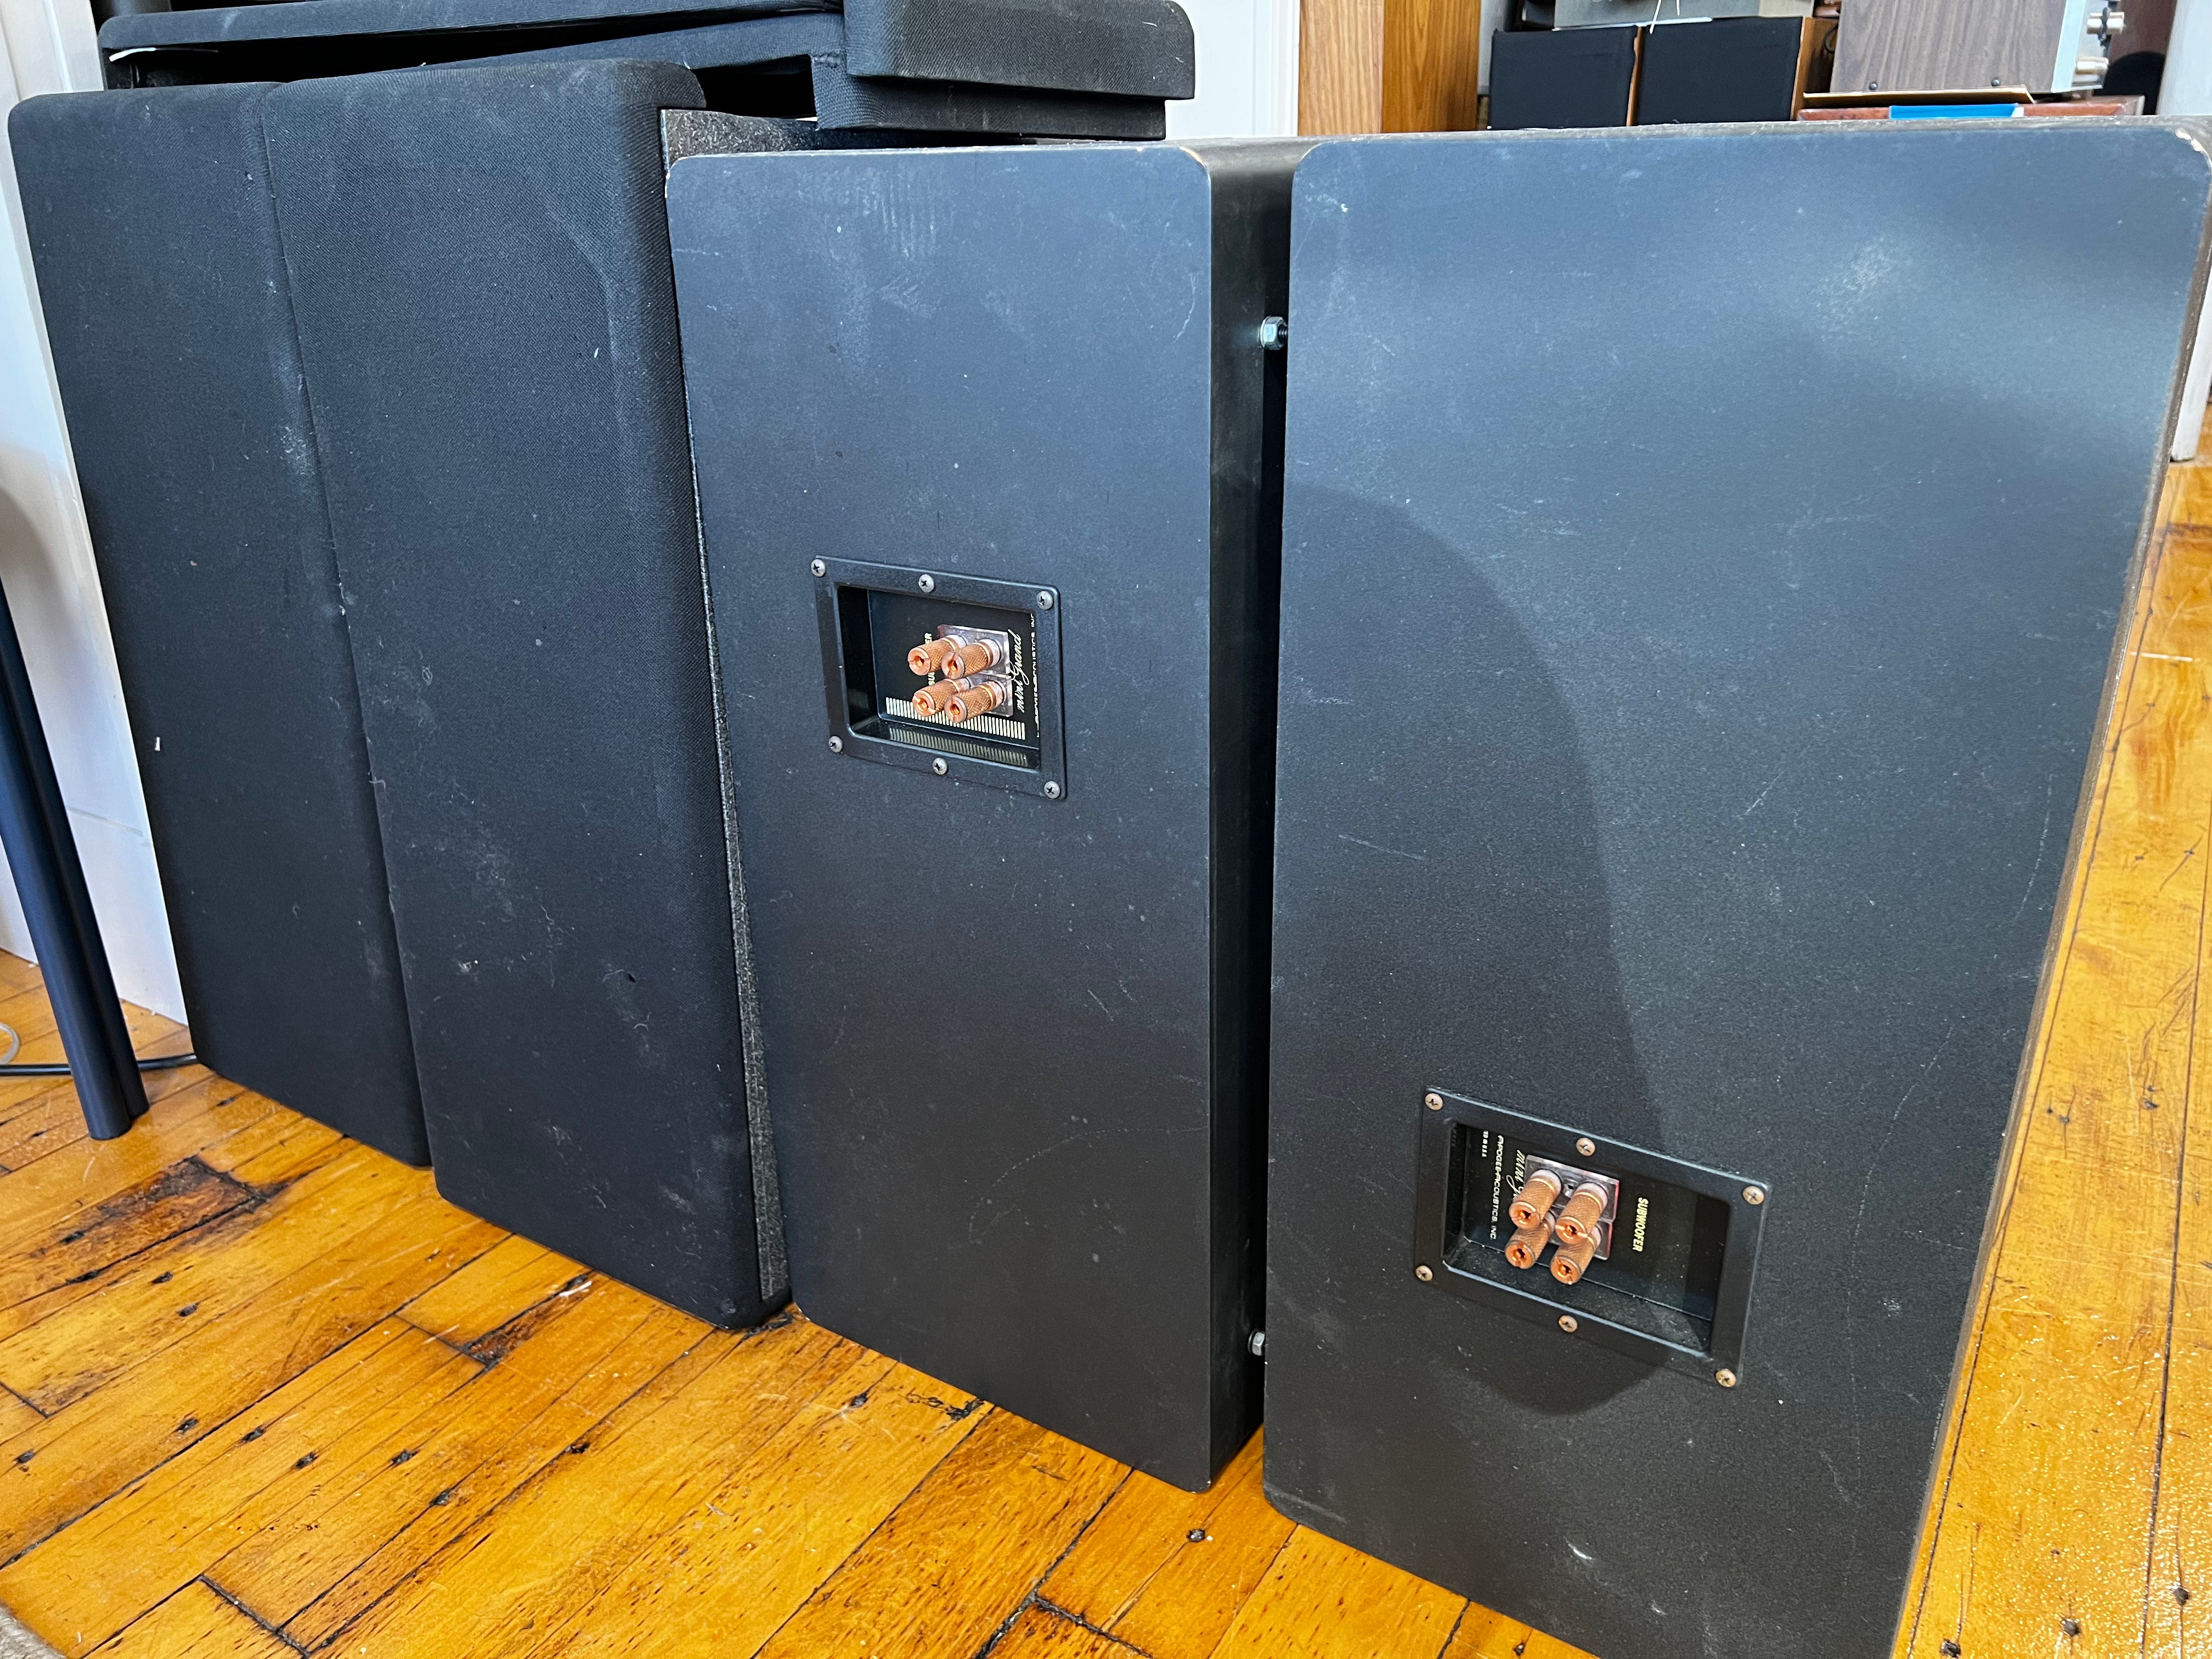 Apogee Acoustics Stage Subwoofers & DAX Crossover - SOLD